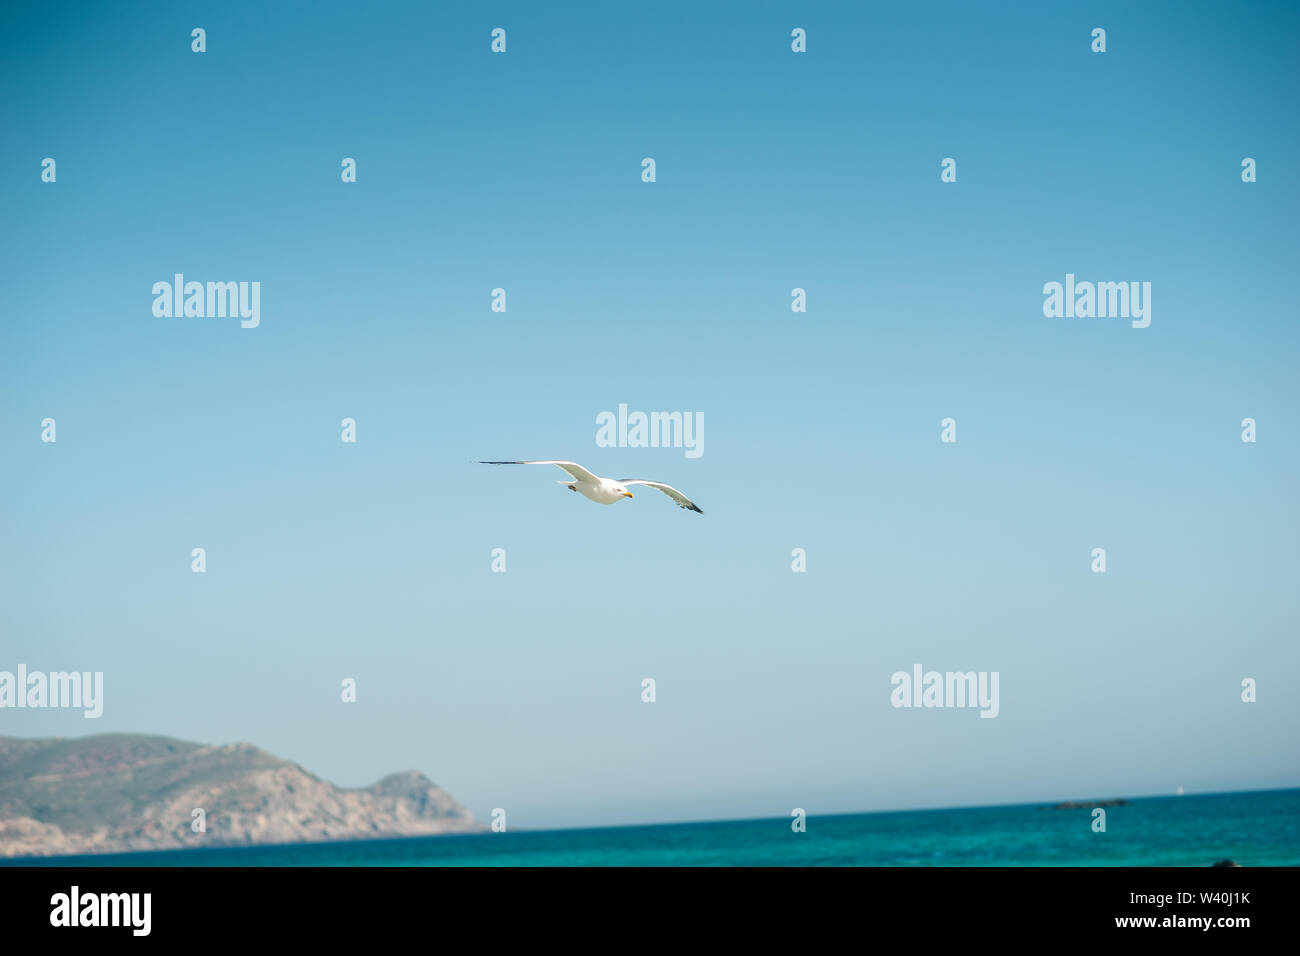 Close-up shot of a Single seagull flying, blue sky in background Stock Photo